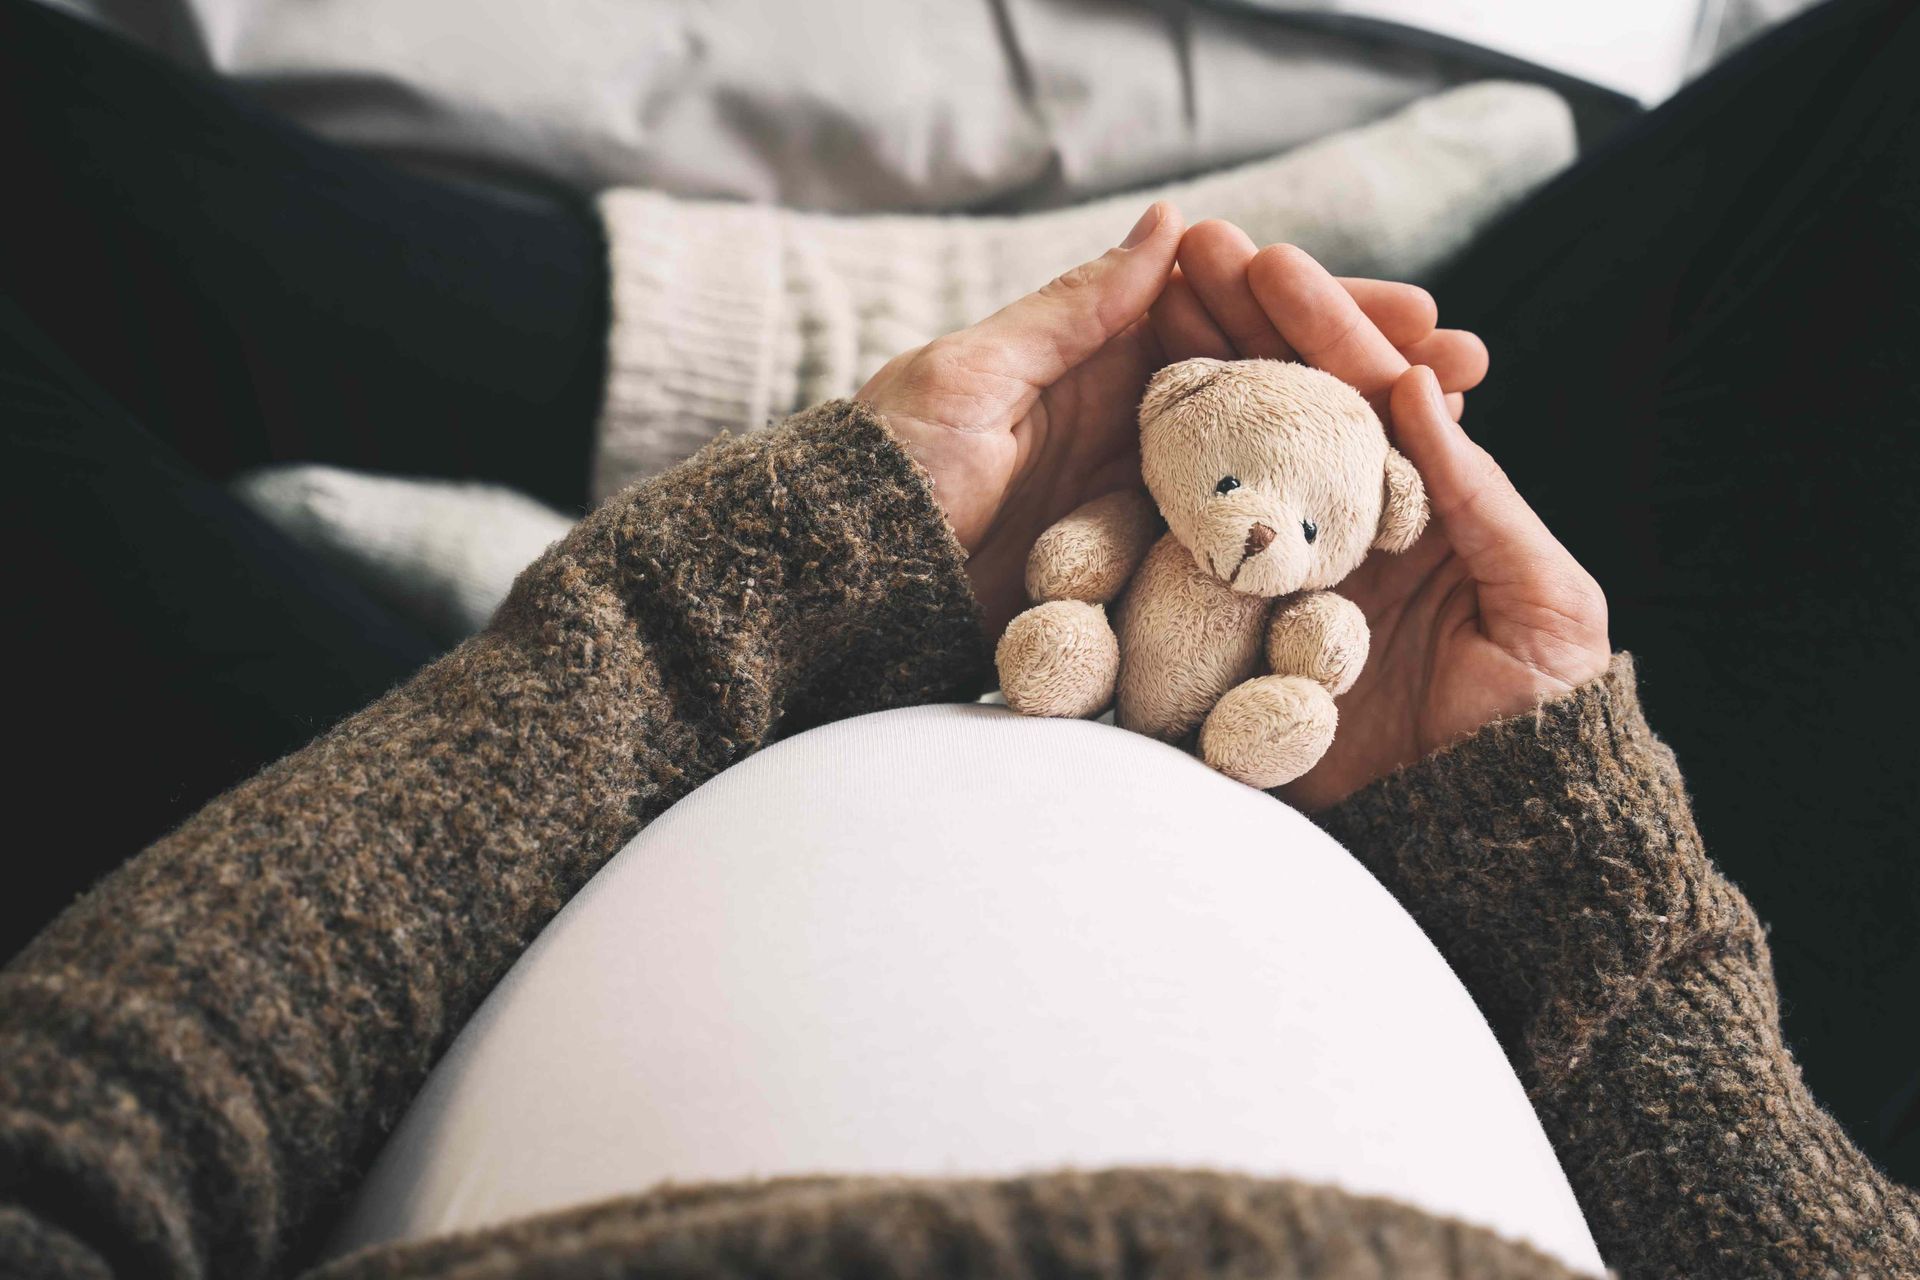 A woman with teddy bear in maternity picture